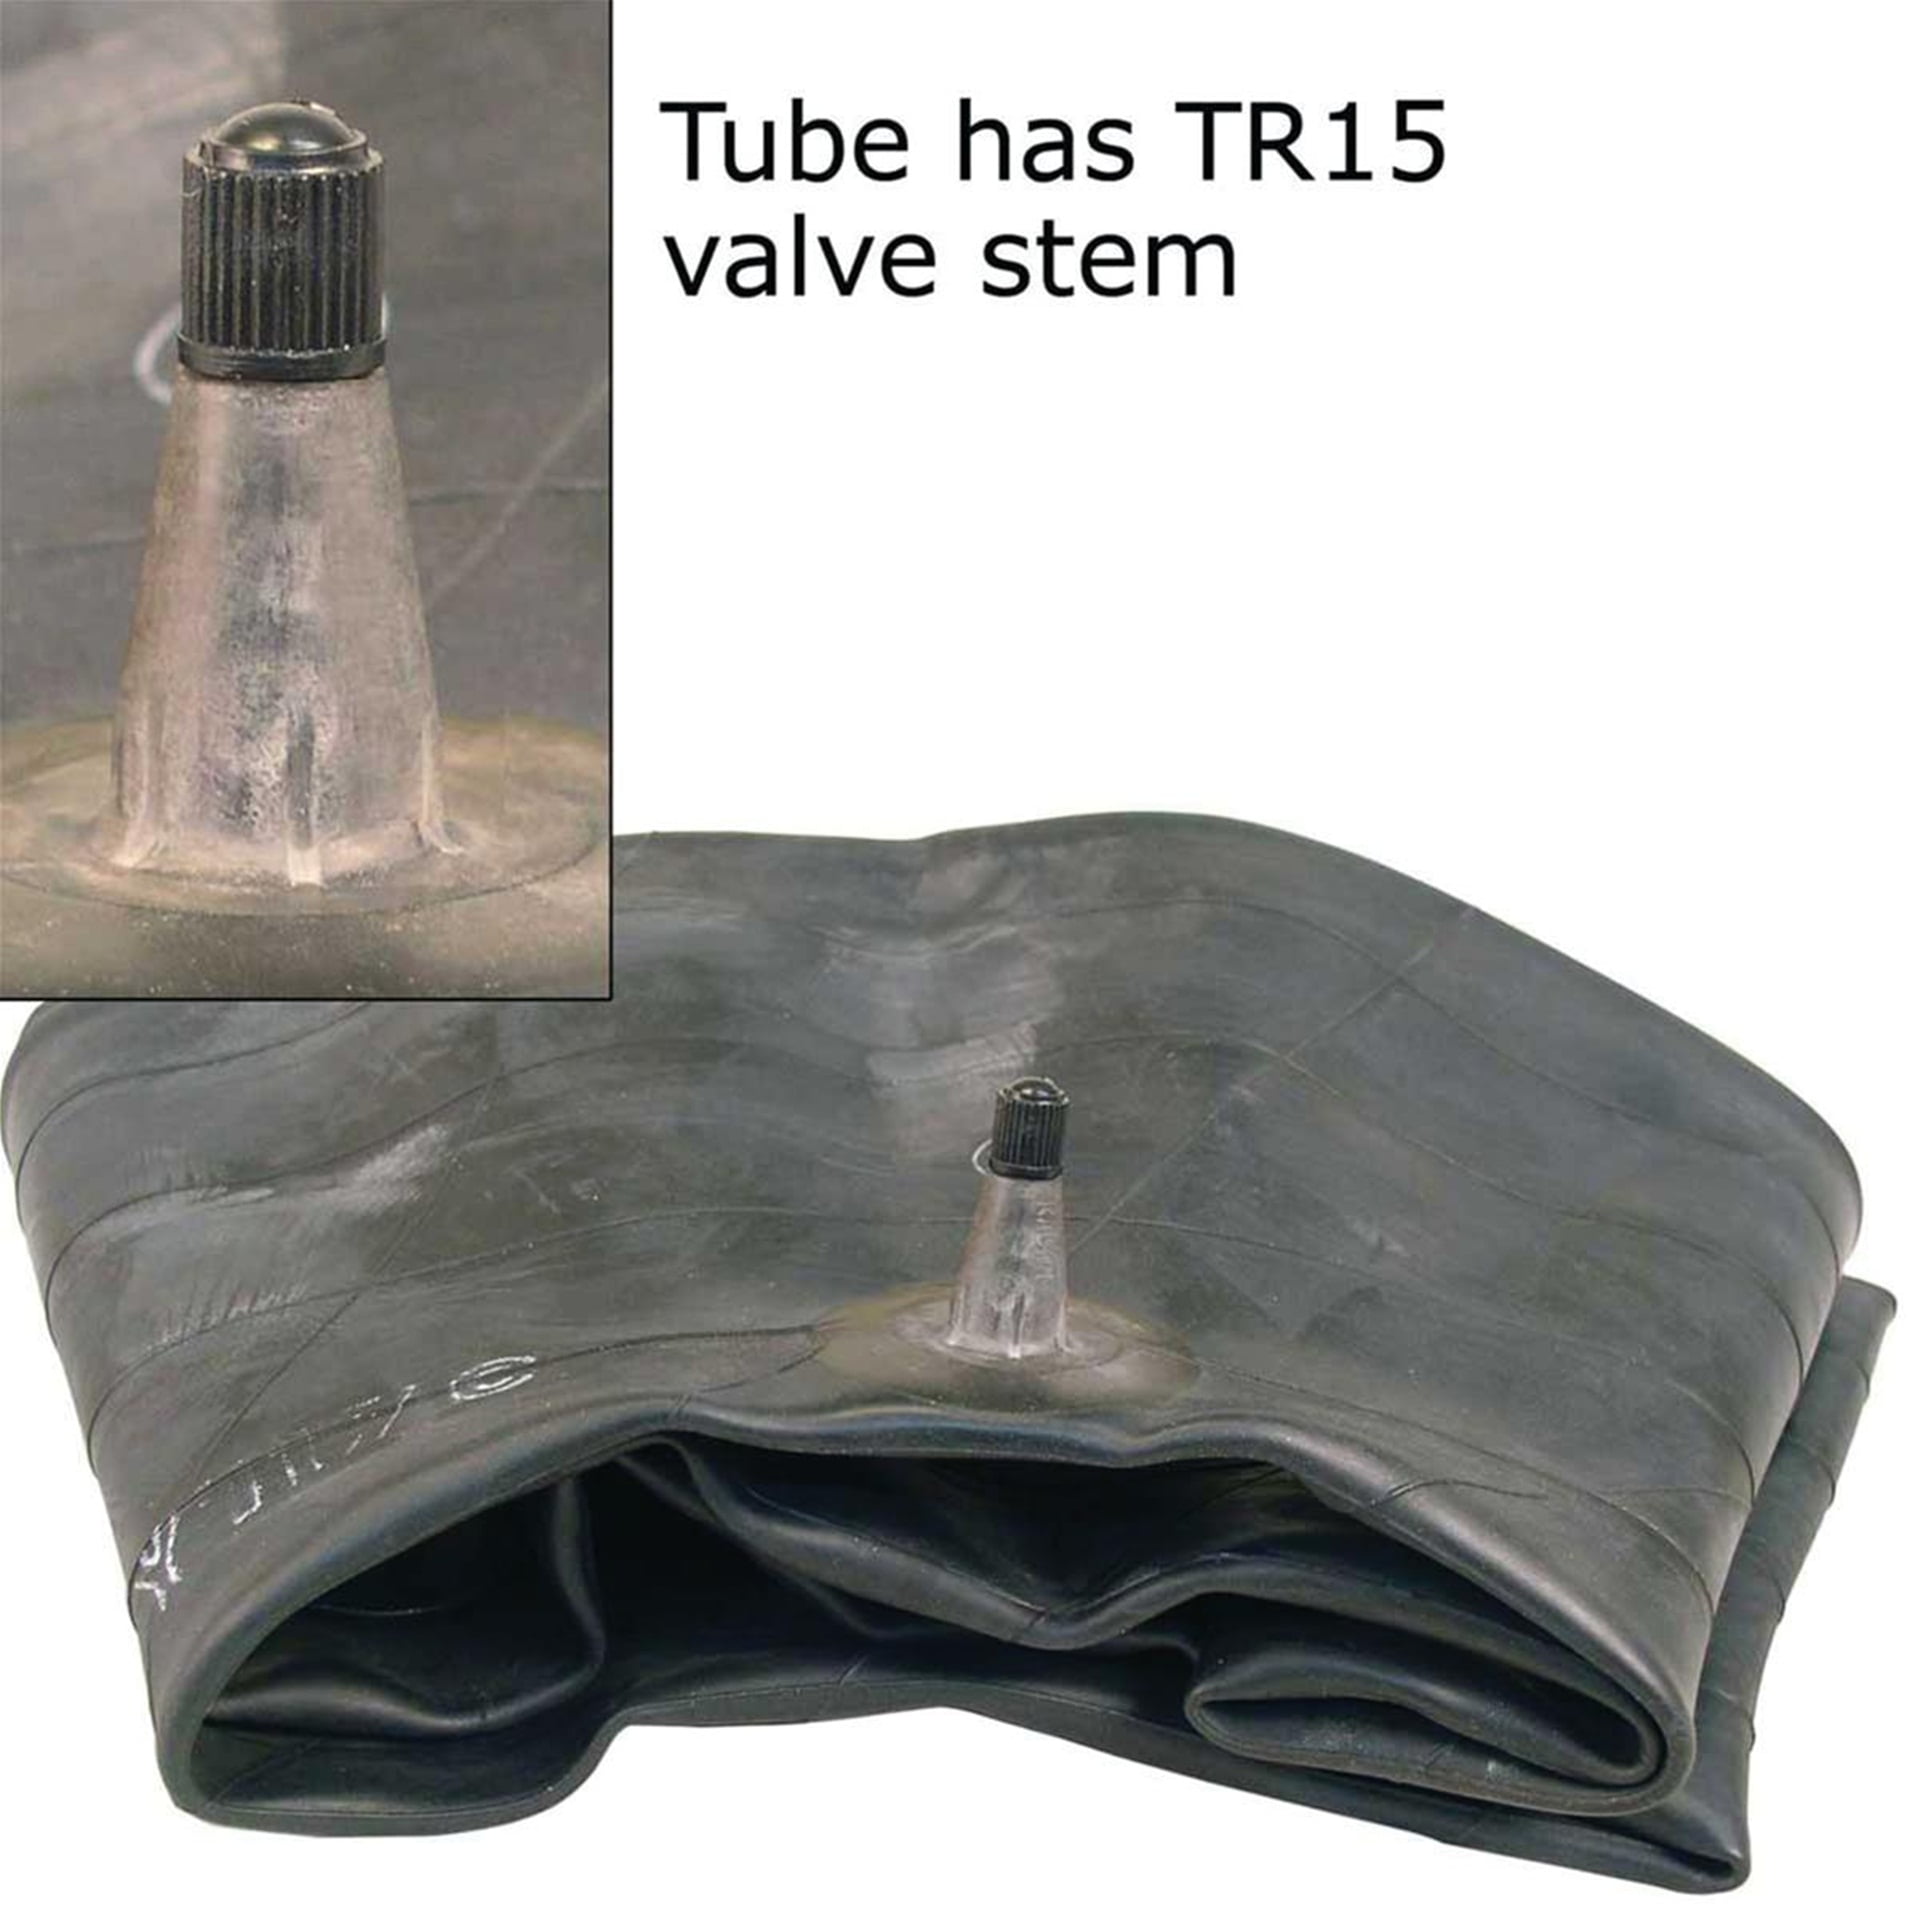 Antique Classic Car Truck Tire Inner Tube with TR15 Rubber Valve Stem 16 6.00x16 6.50-16 